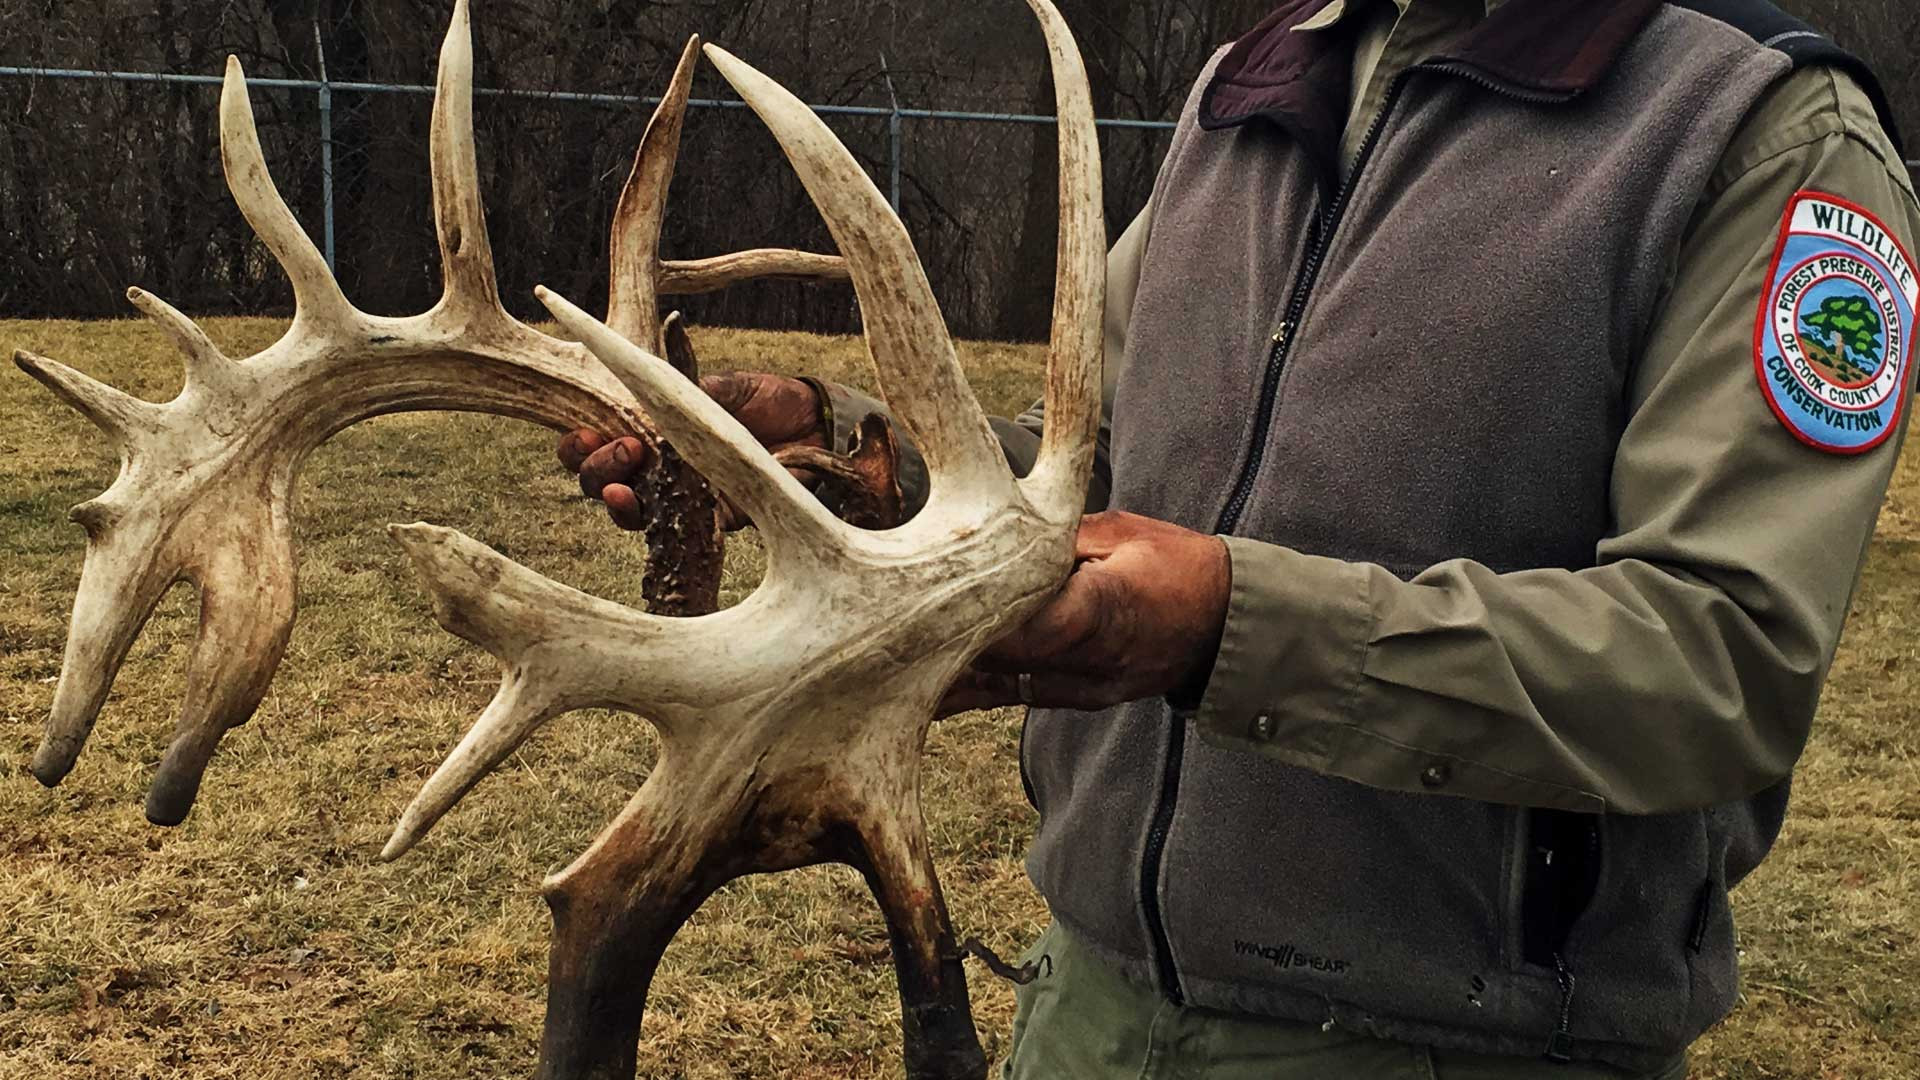 Article Spurs Interest In Giant Buck | Bowhunting  2021 Illinois Whitetail Season Outlook